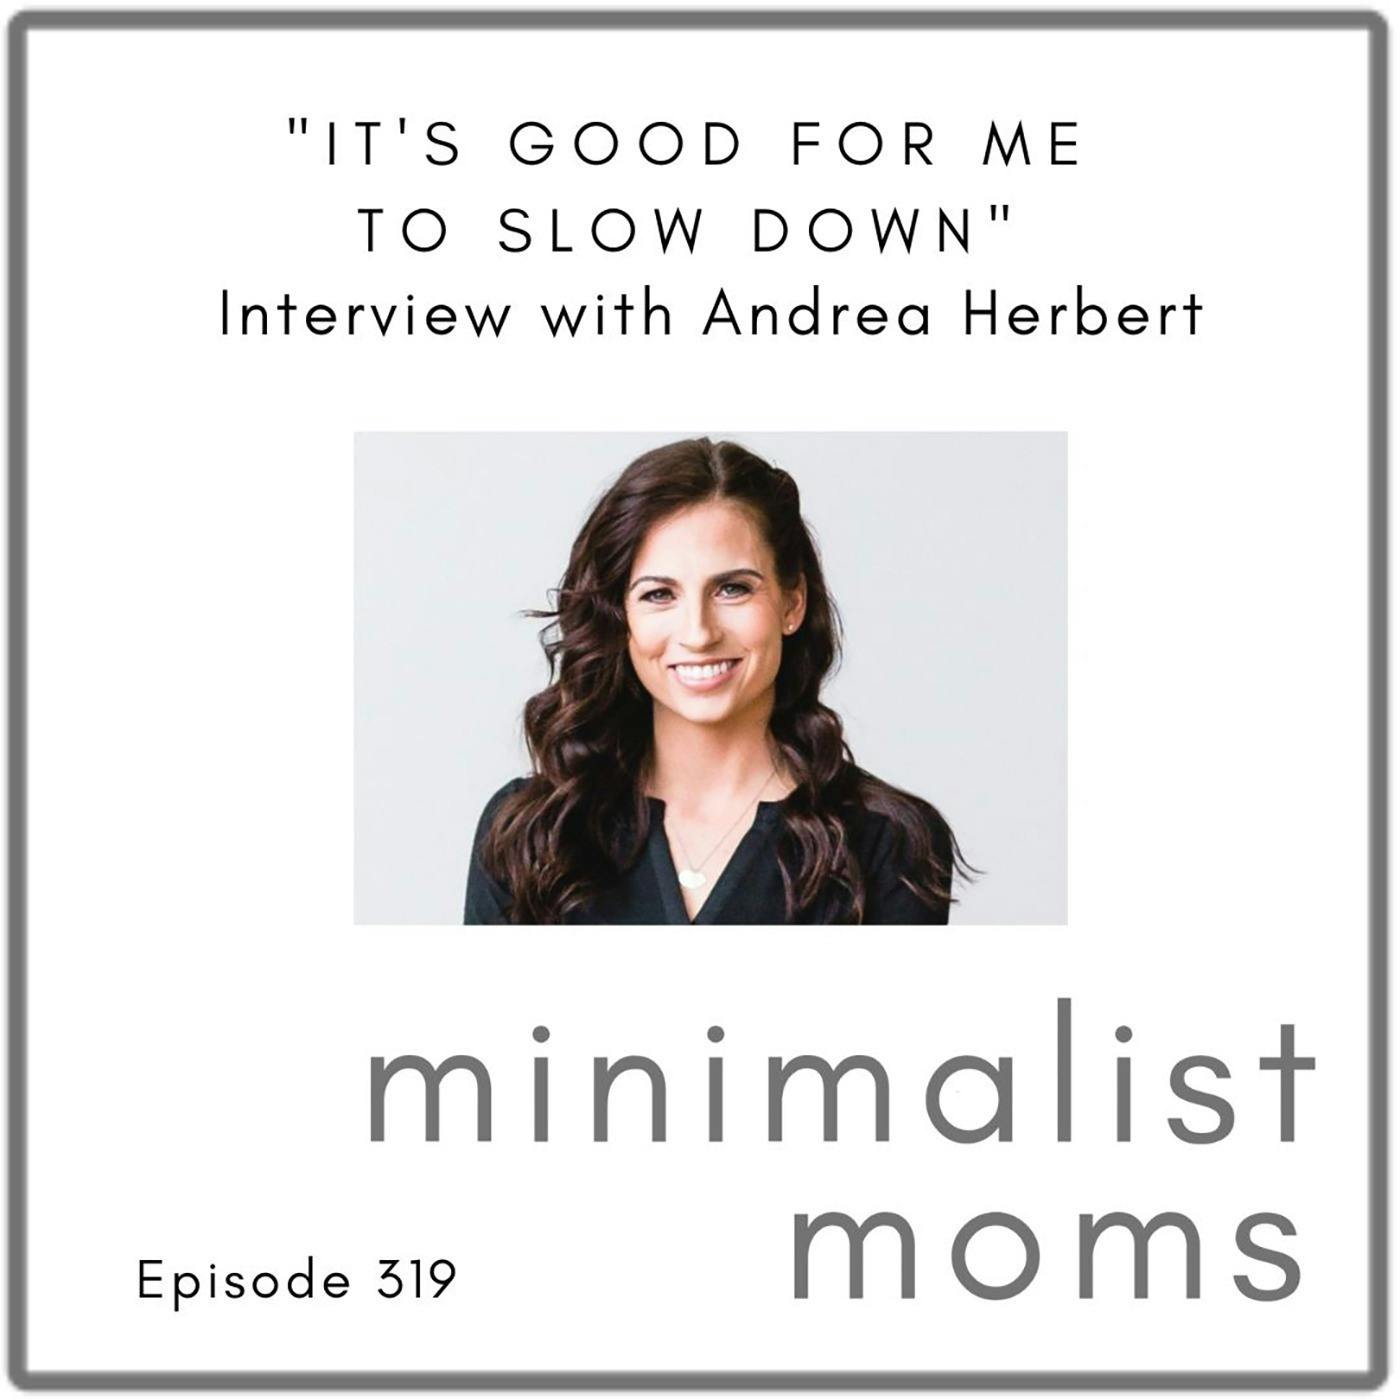 ”It’s Good for Me to Slow Down” with Andrea Herbert (EP319)